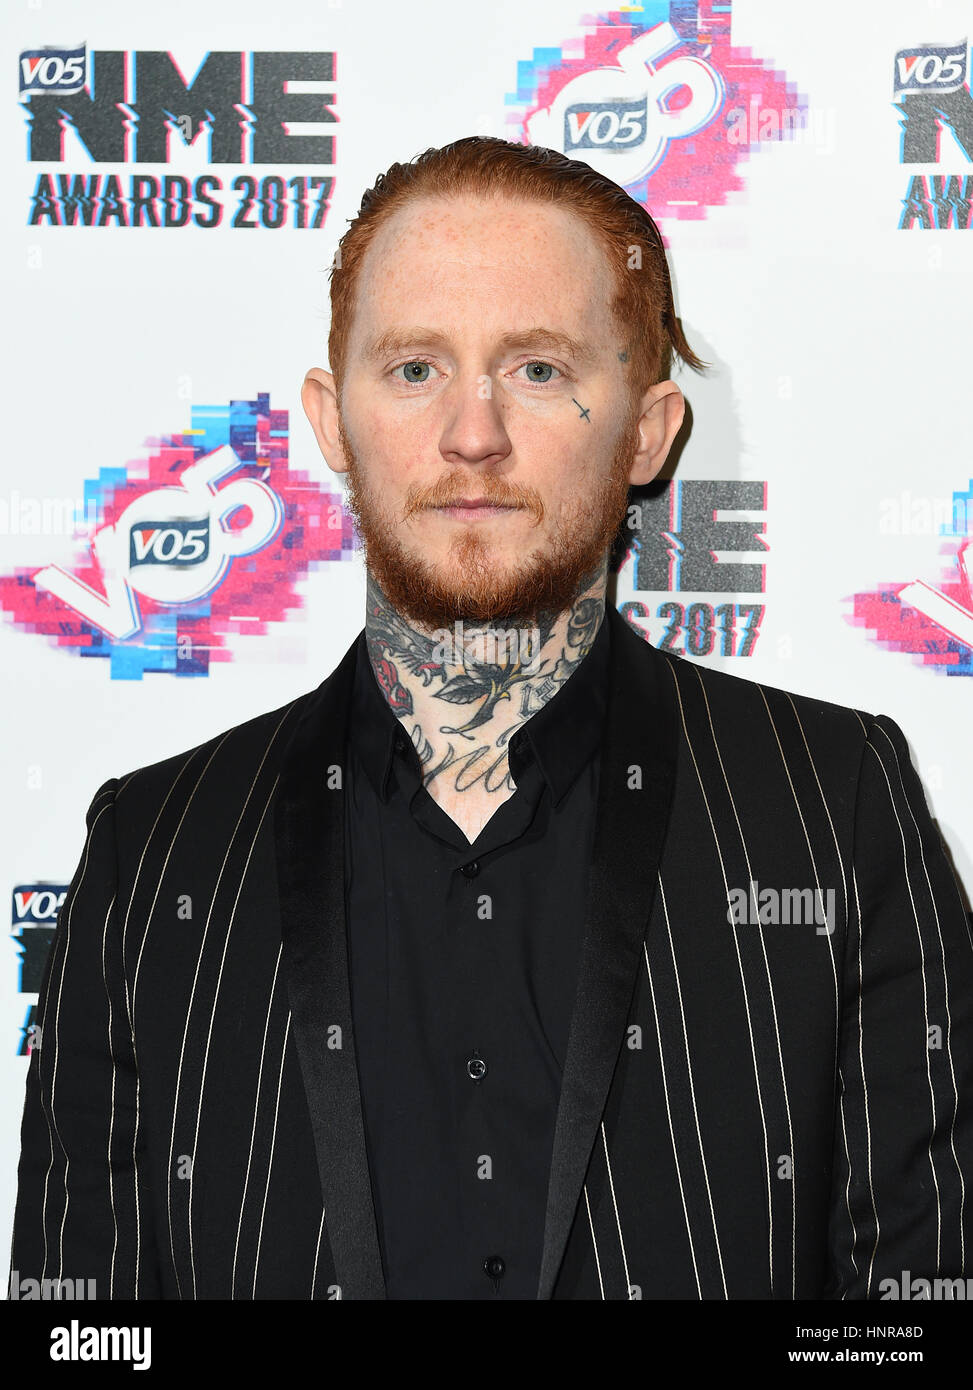 Frank Carter from Frank Carter & The Rattlesnakes arriving for the VO5 NME Awards 2017 held at the O2 Brixton Academy, London. PRESS ASSOCIATION Photo. Picture date: Wednesday February 15, 2017. See PA Story SHOWBIZ NME. Photo credit should read: Matt Crossick/PA Wire Stock Photo